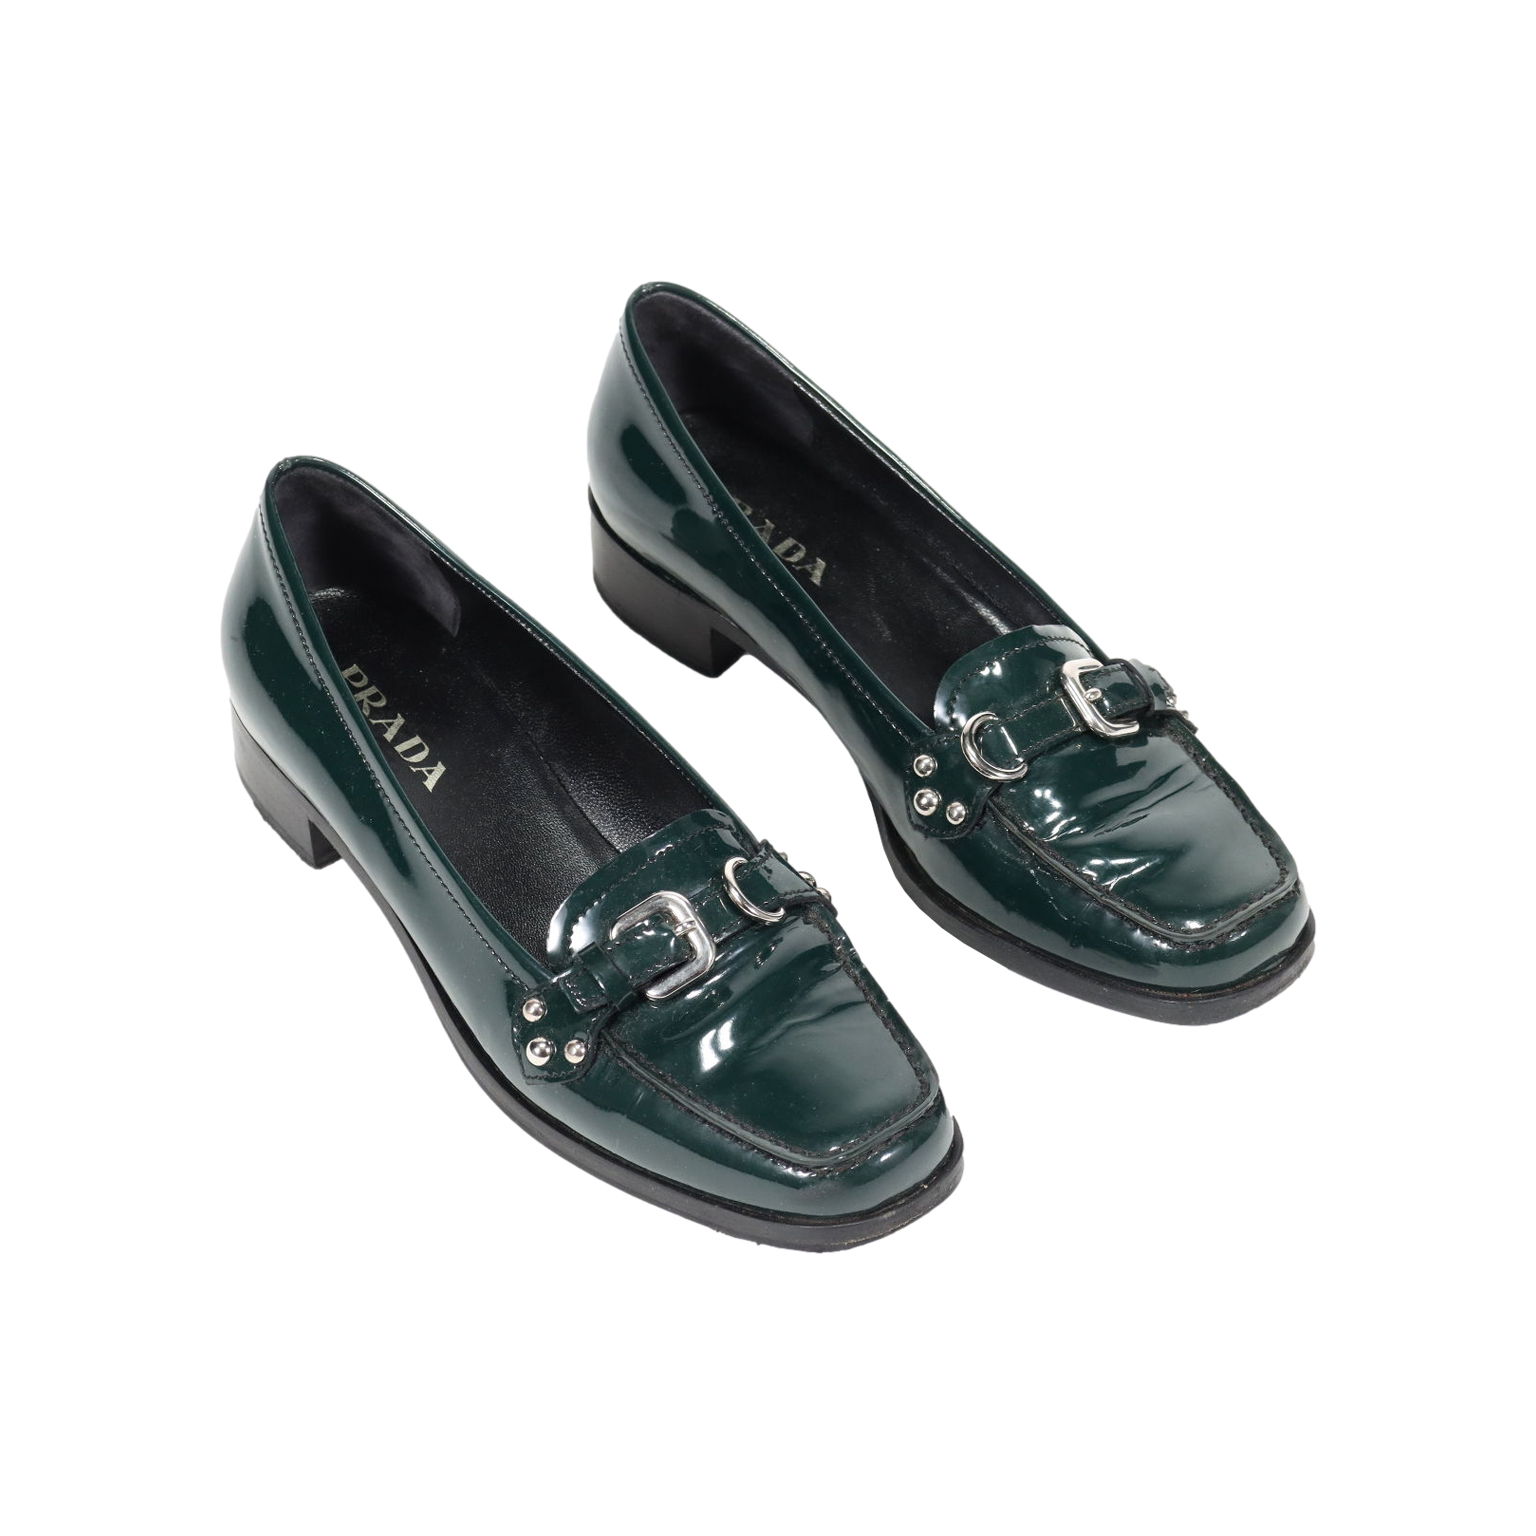 Prada patent leather loafers, Number 35 and a half, Clothing, Winter  accessories, dimanoinmano. It